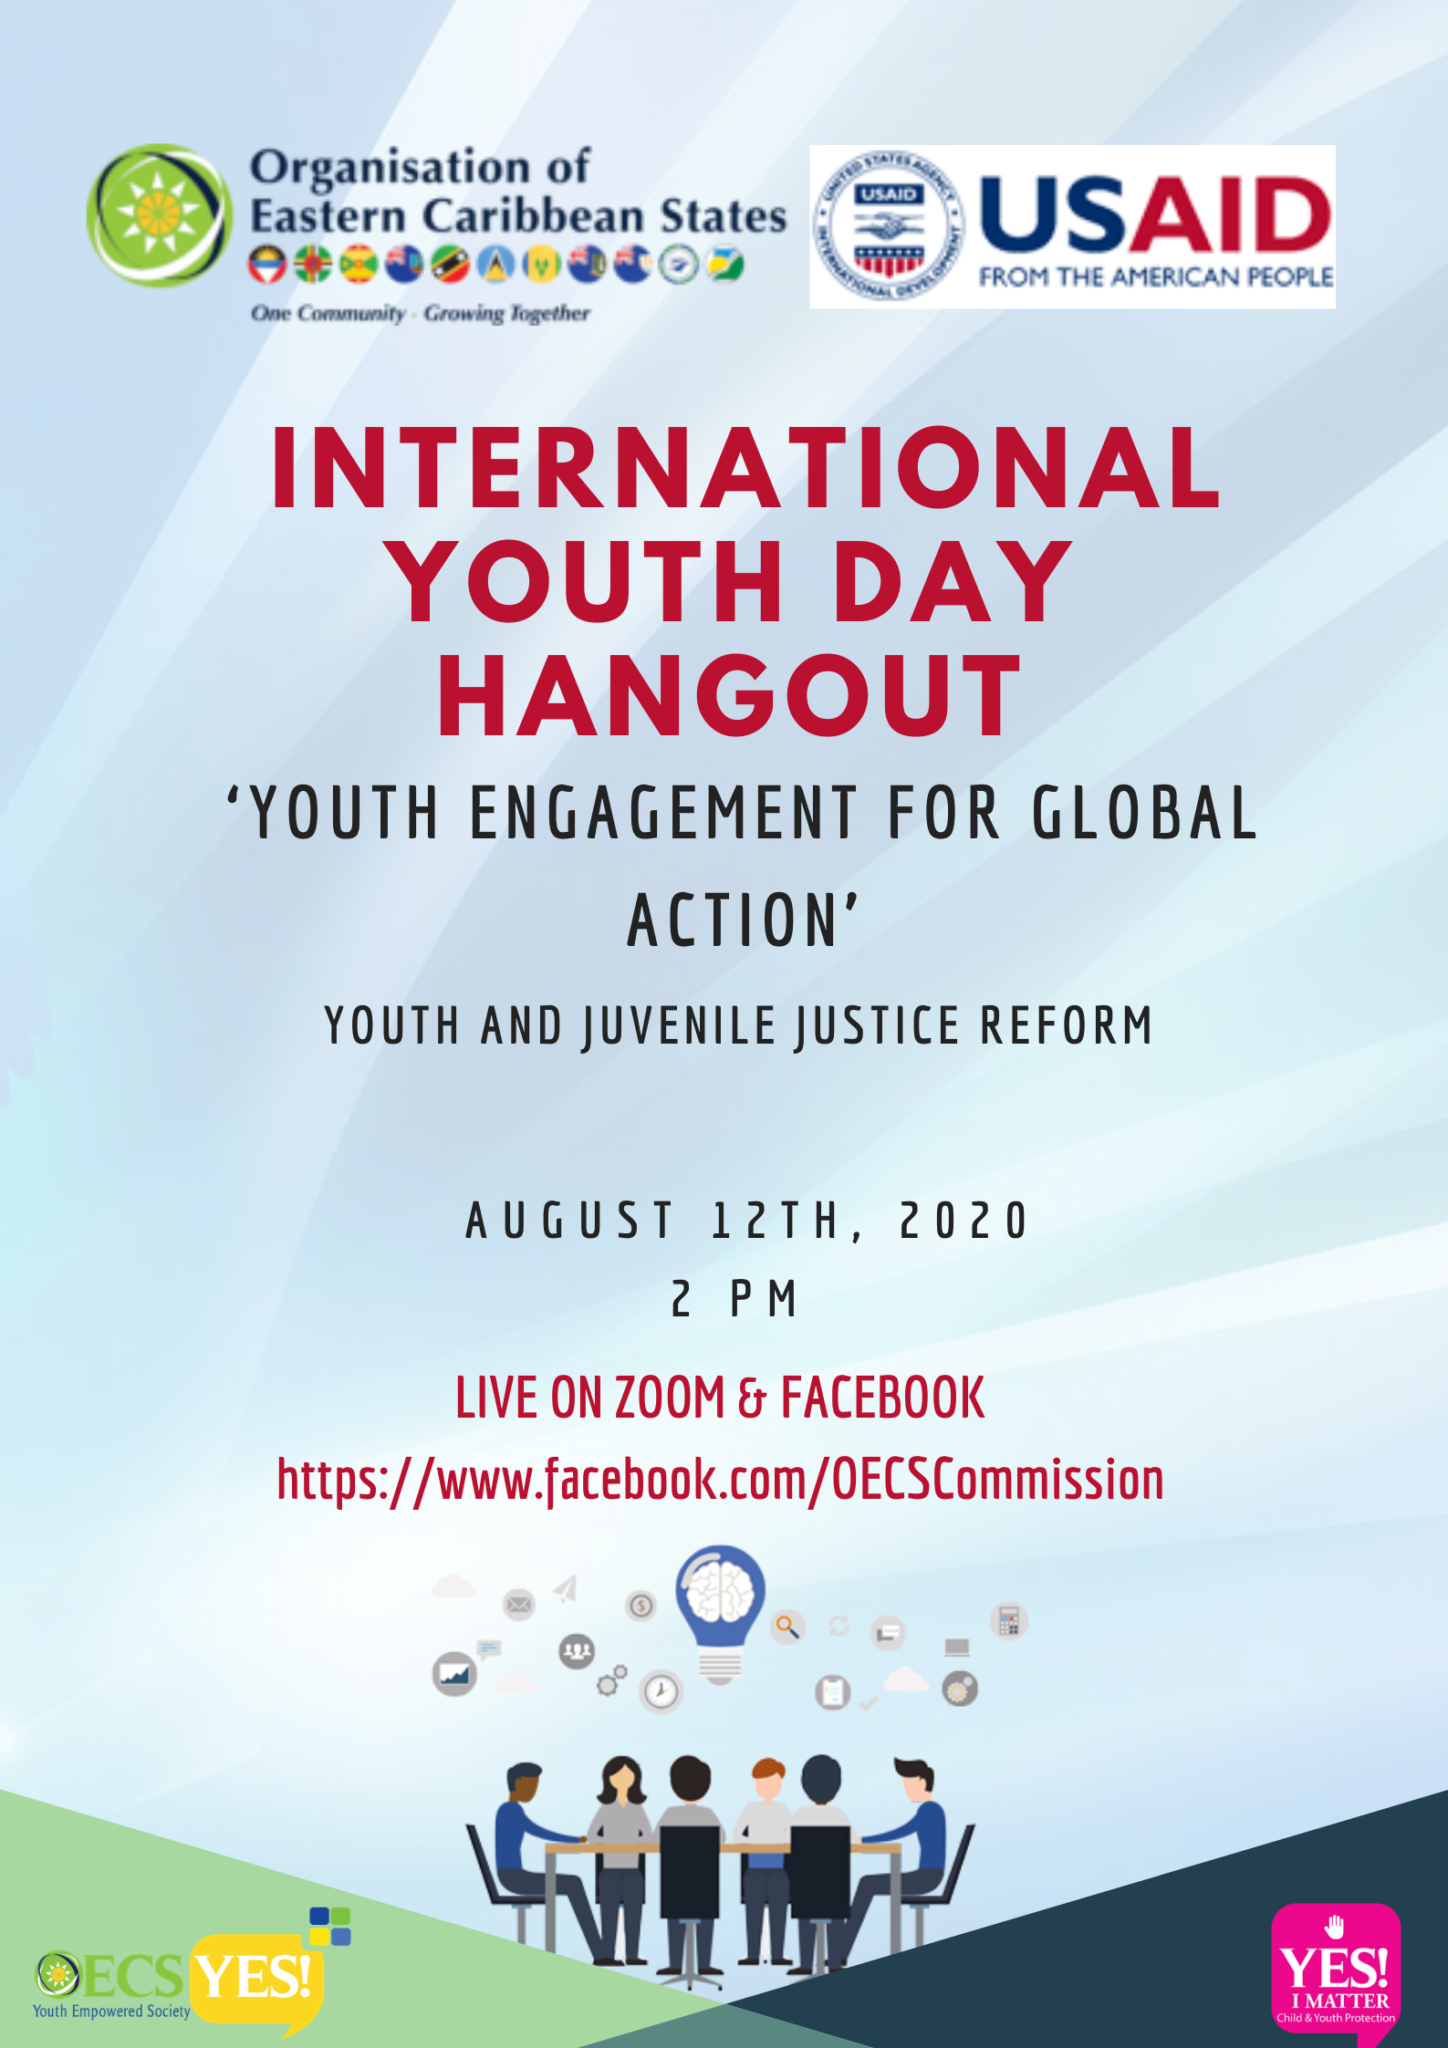  OECS Commission puts Youth and Juvenile Justice Reform on the agenda for International Youth Day